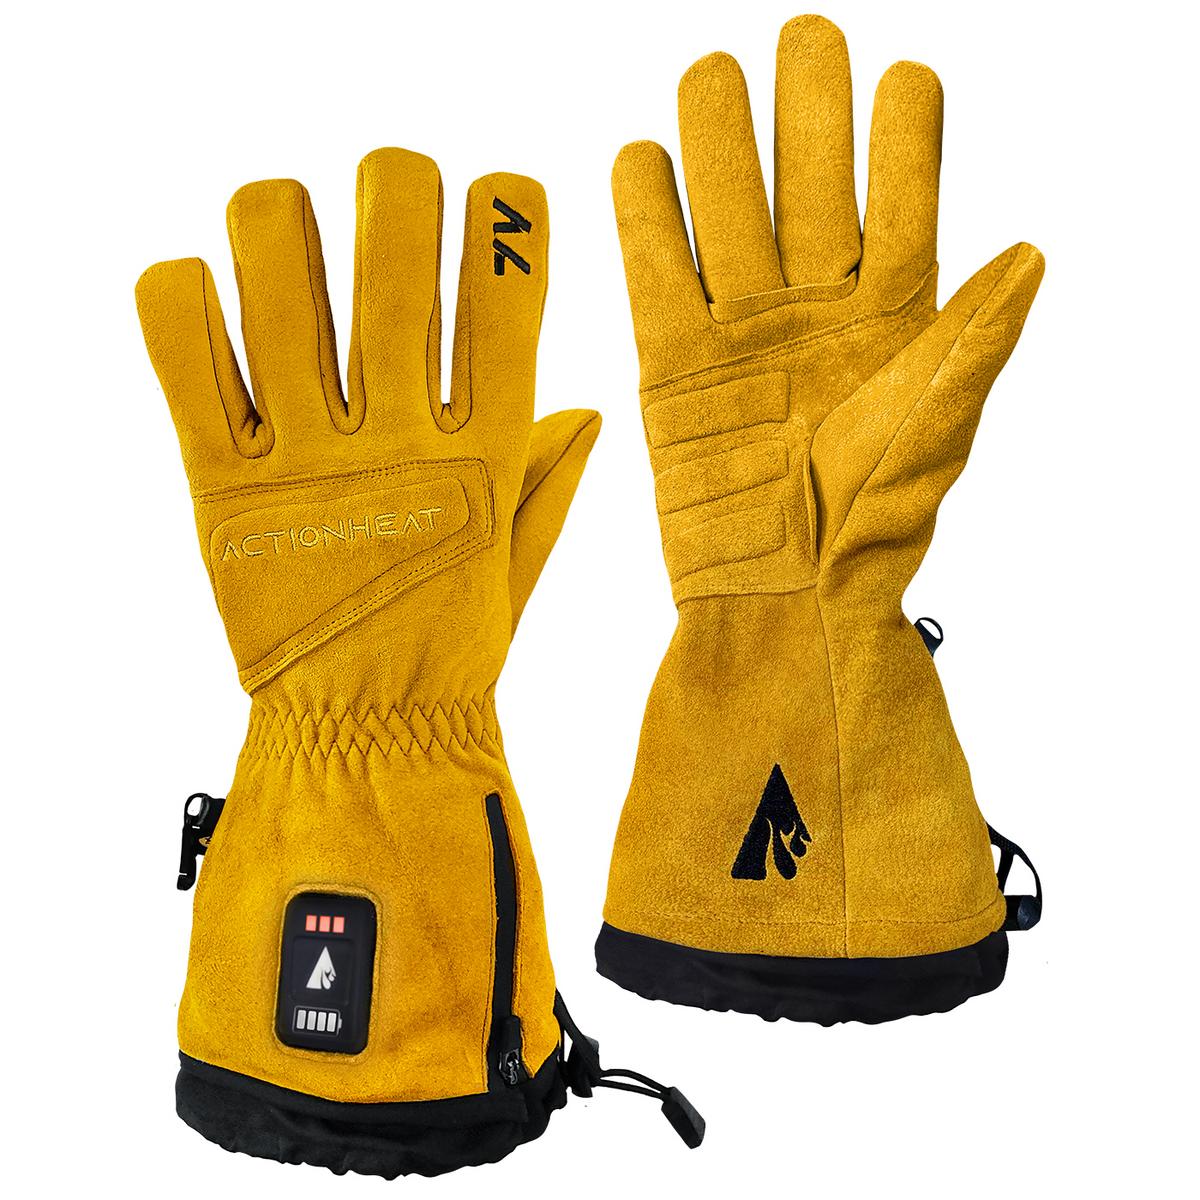 ActionHeat 7V Rugged Leather Heated Work Gloves - Heated